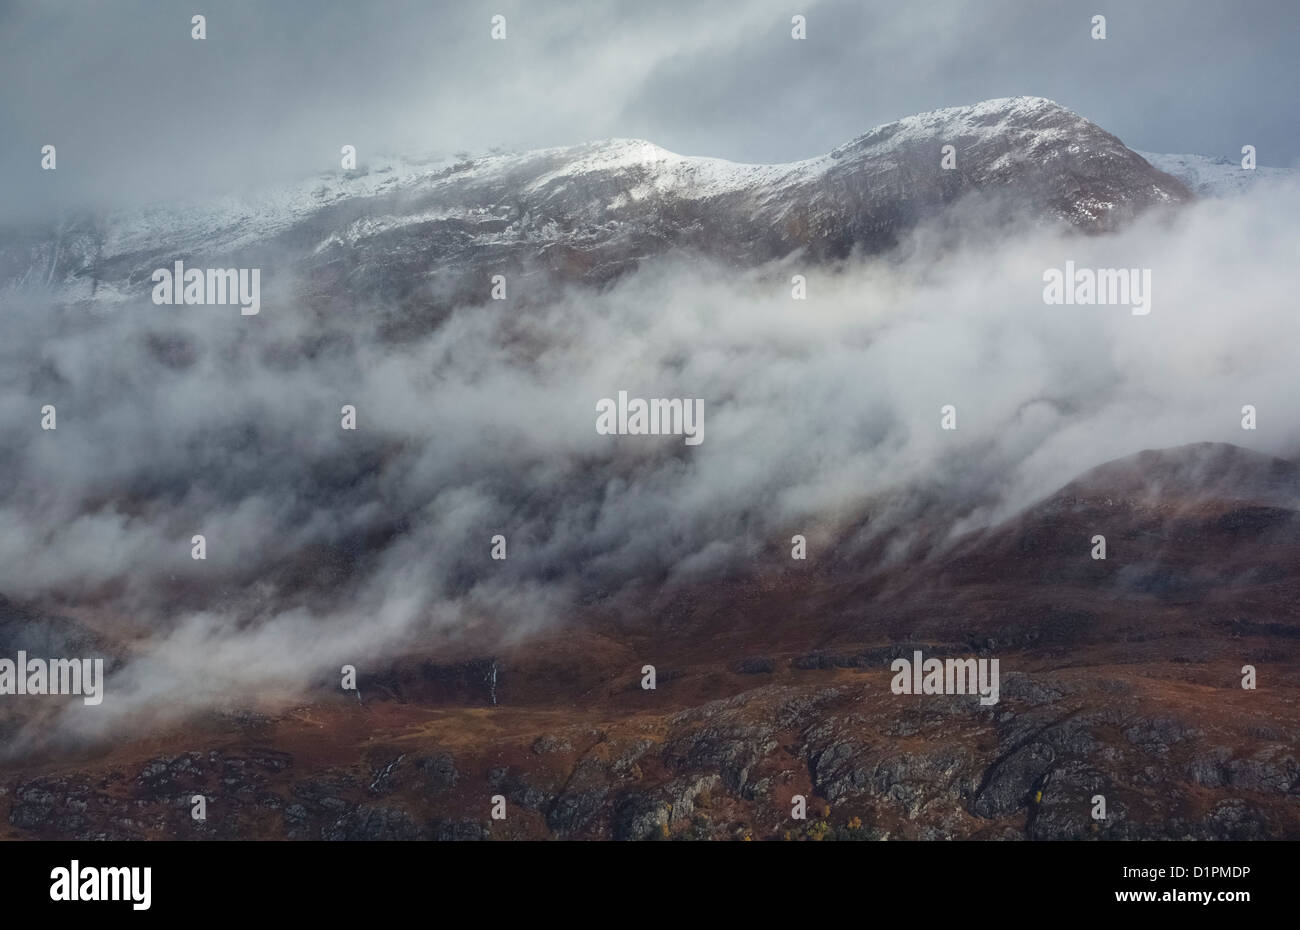 Low cloud around the summits of Sgurr Dubh, Sgurr an Tuill Bhain and the water fall at its base near Loch Maree. Stock Photo